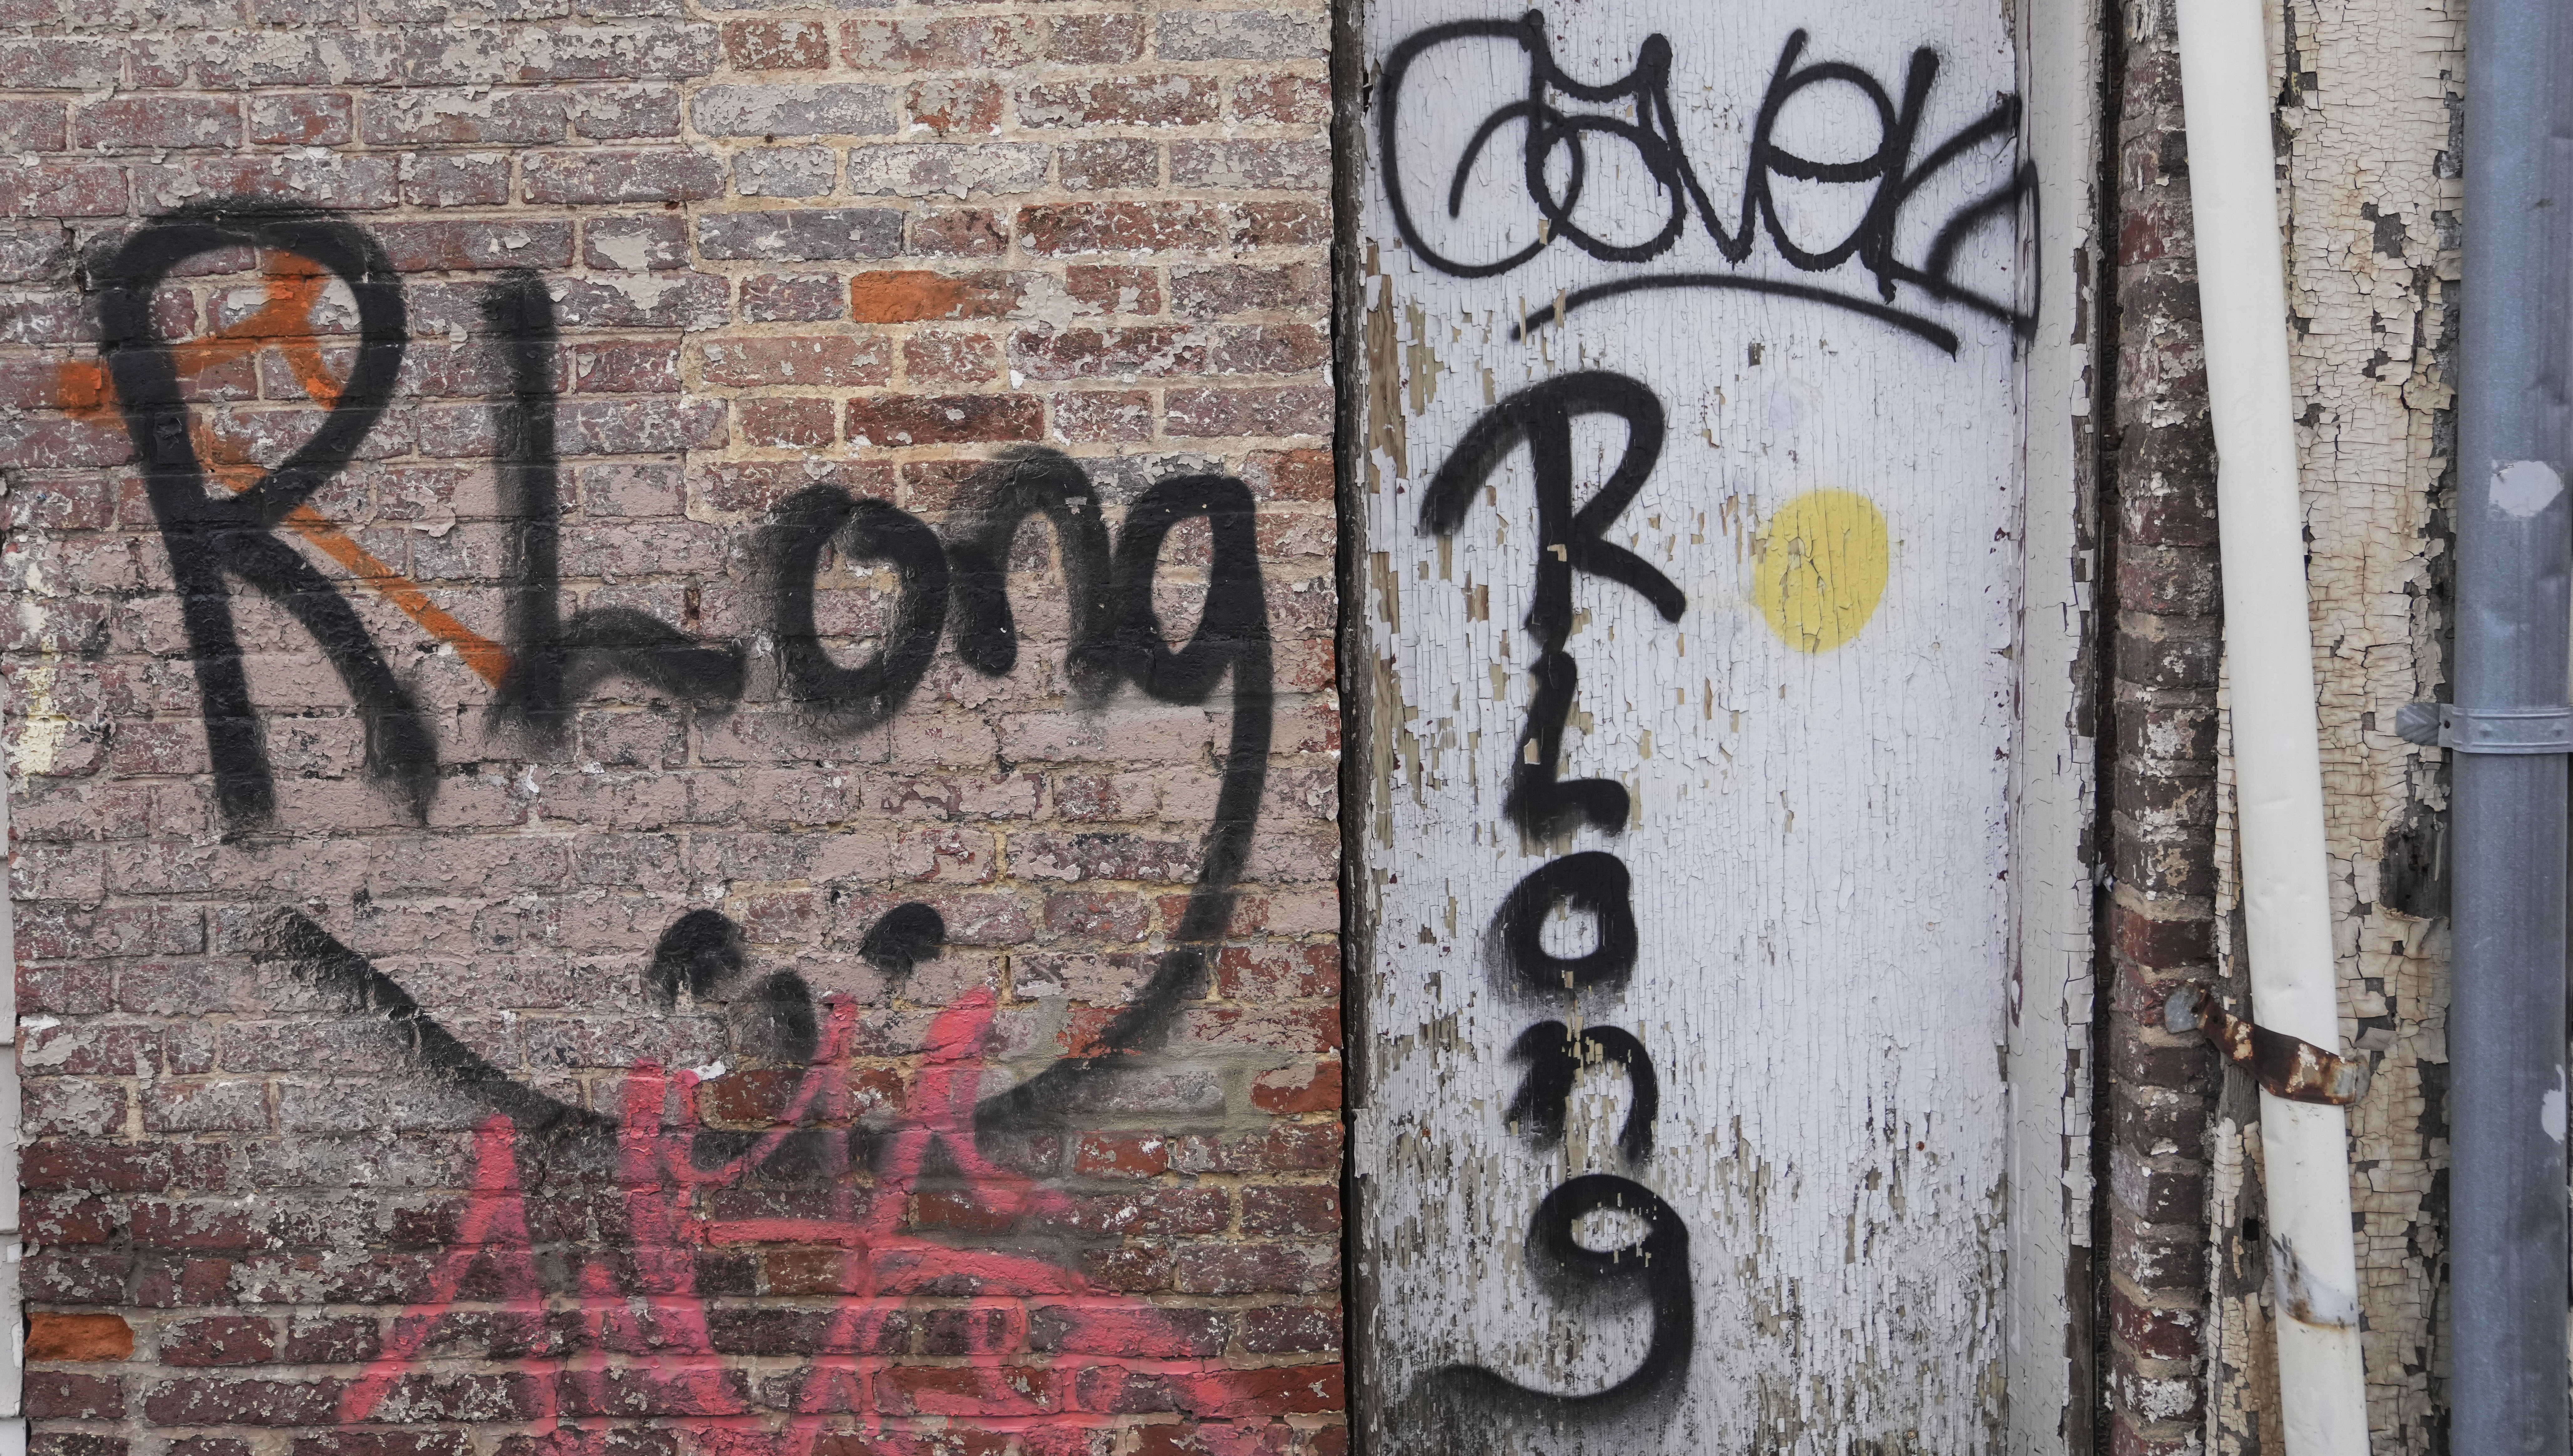 Who is behind the 'RLong' graffiti tag spray-painted all over Baltimore? We  investigate - The Baltimore Banner